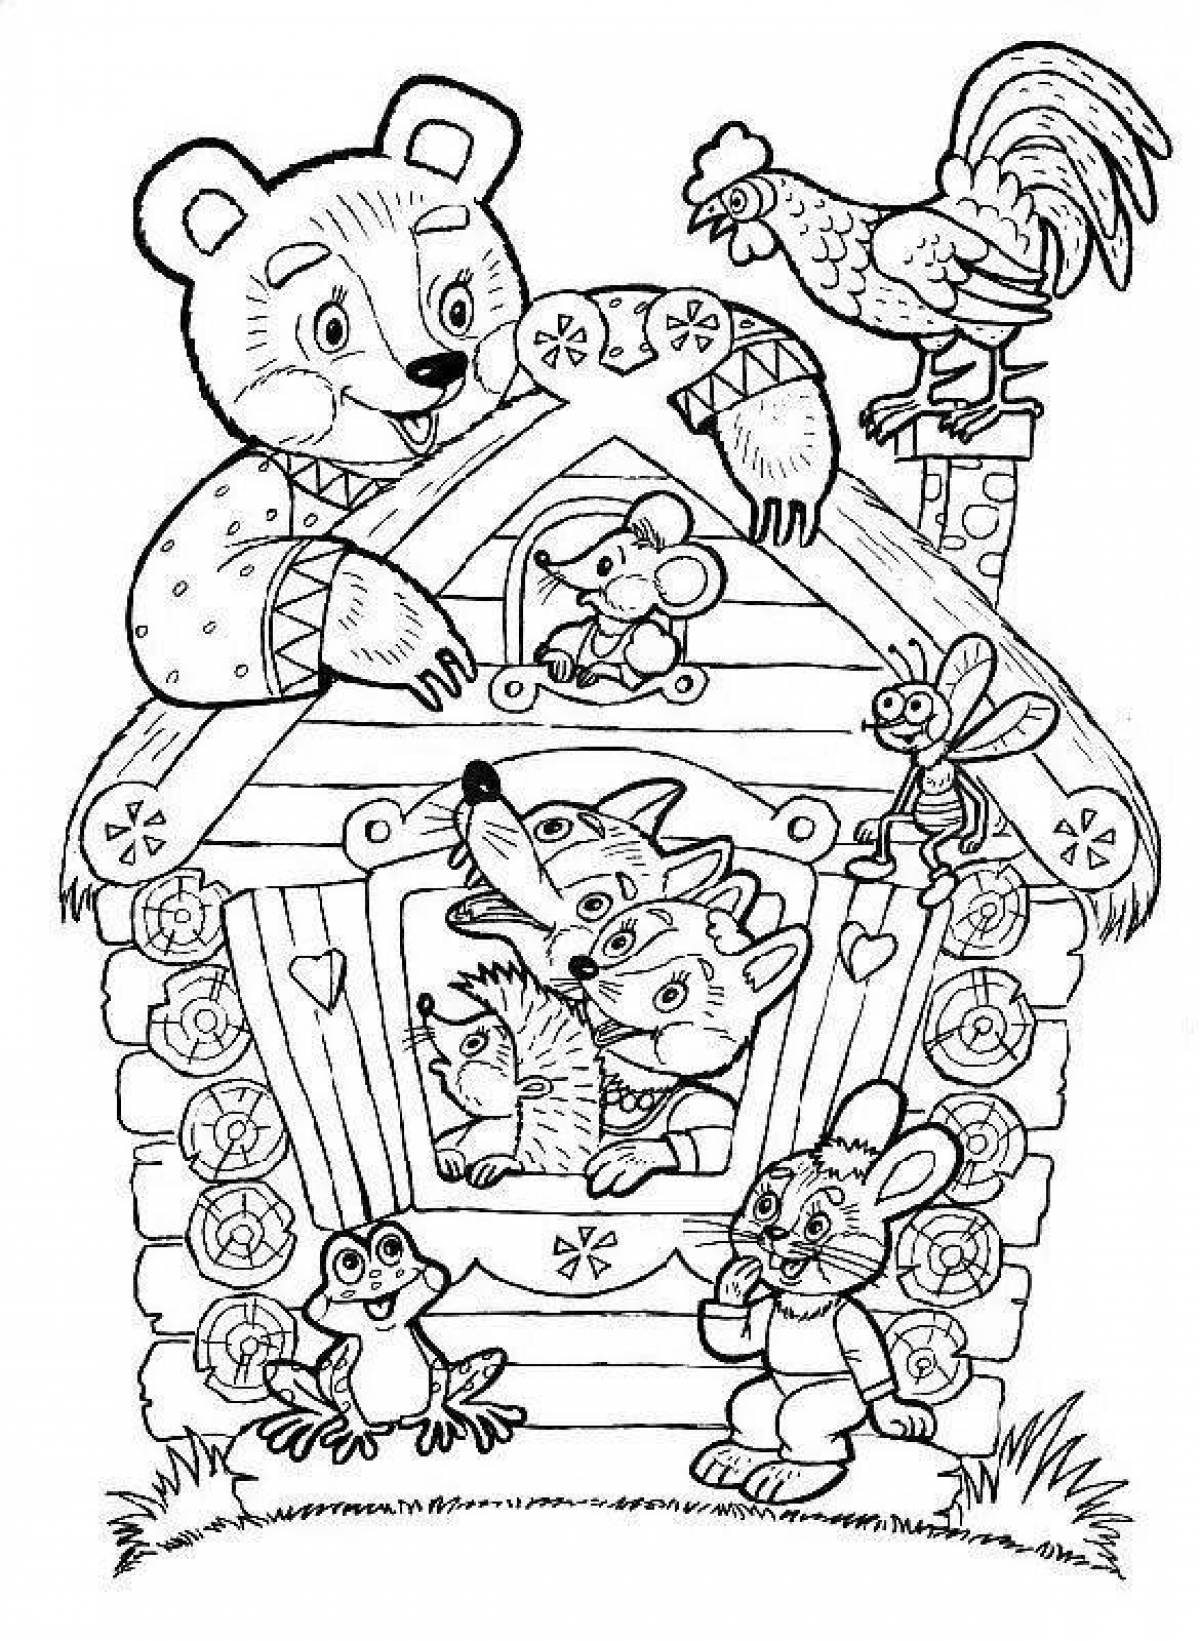 Colorful coloring book heroes of fairy tales for children